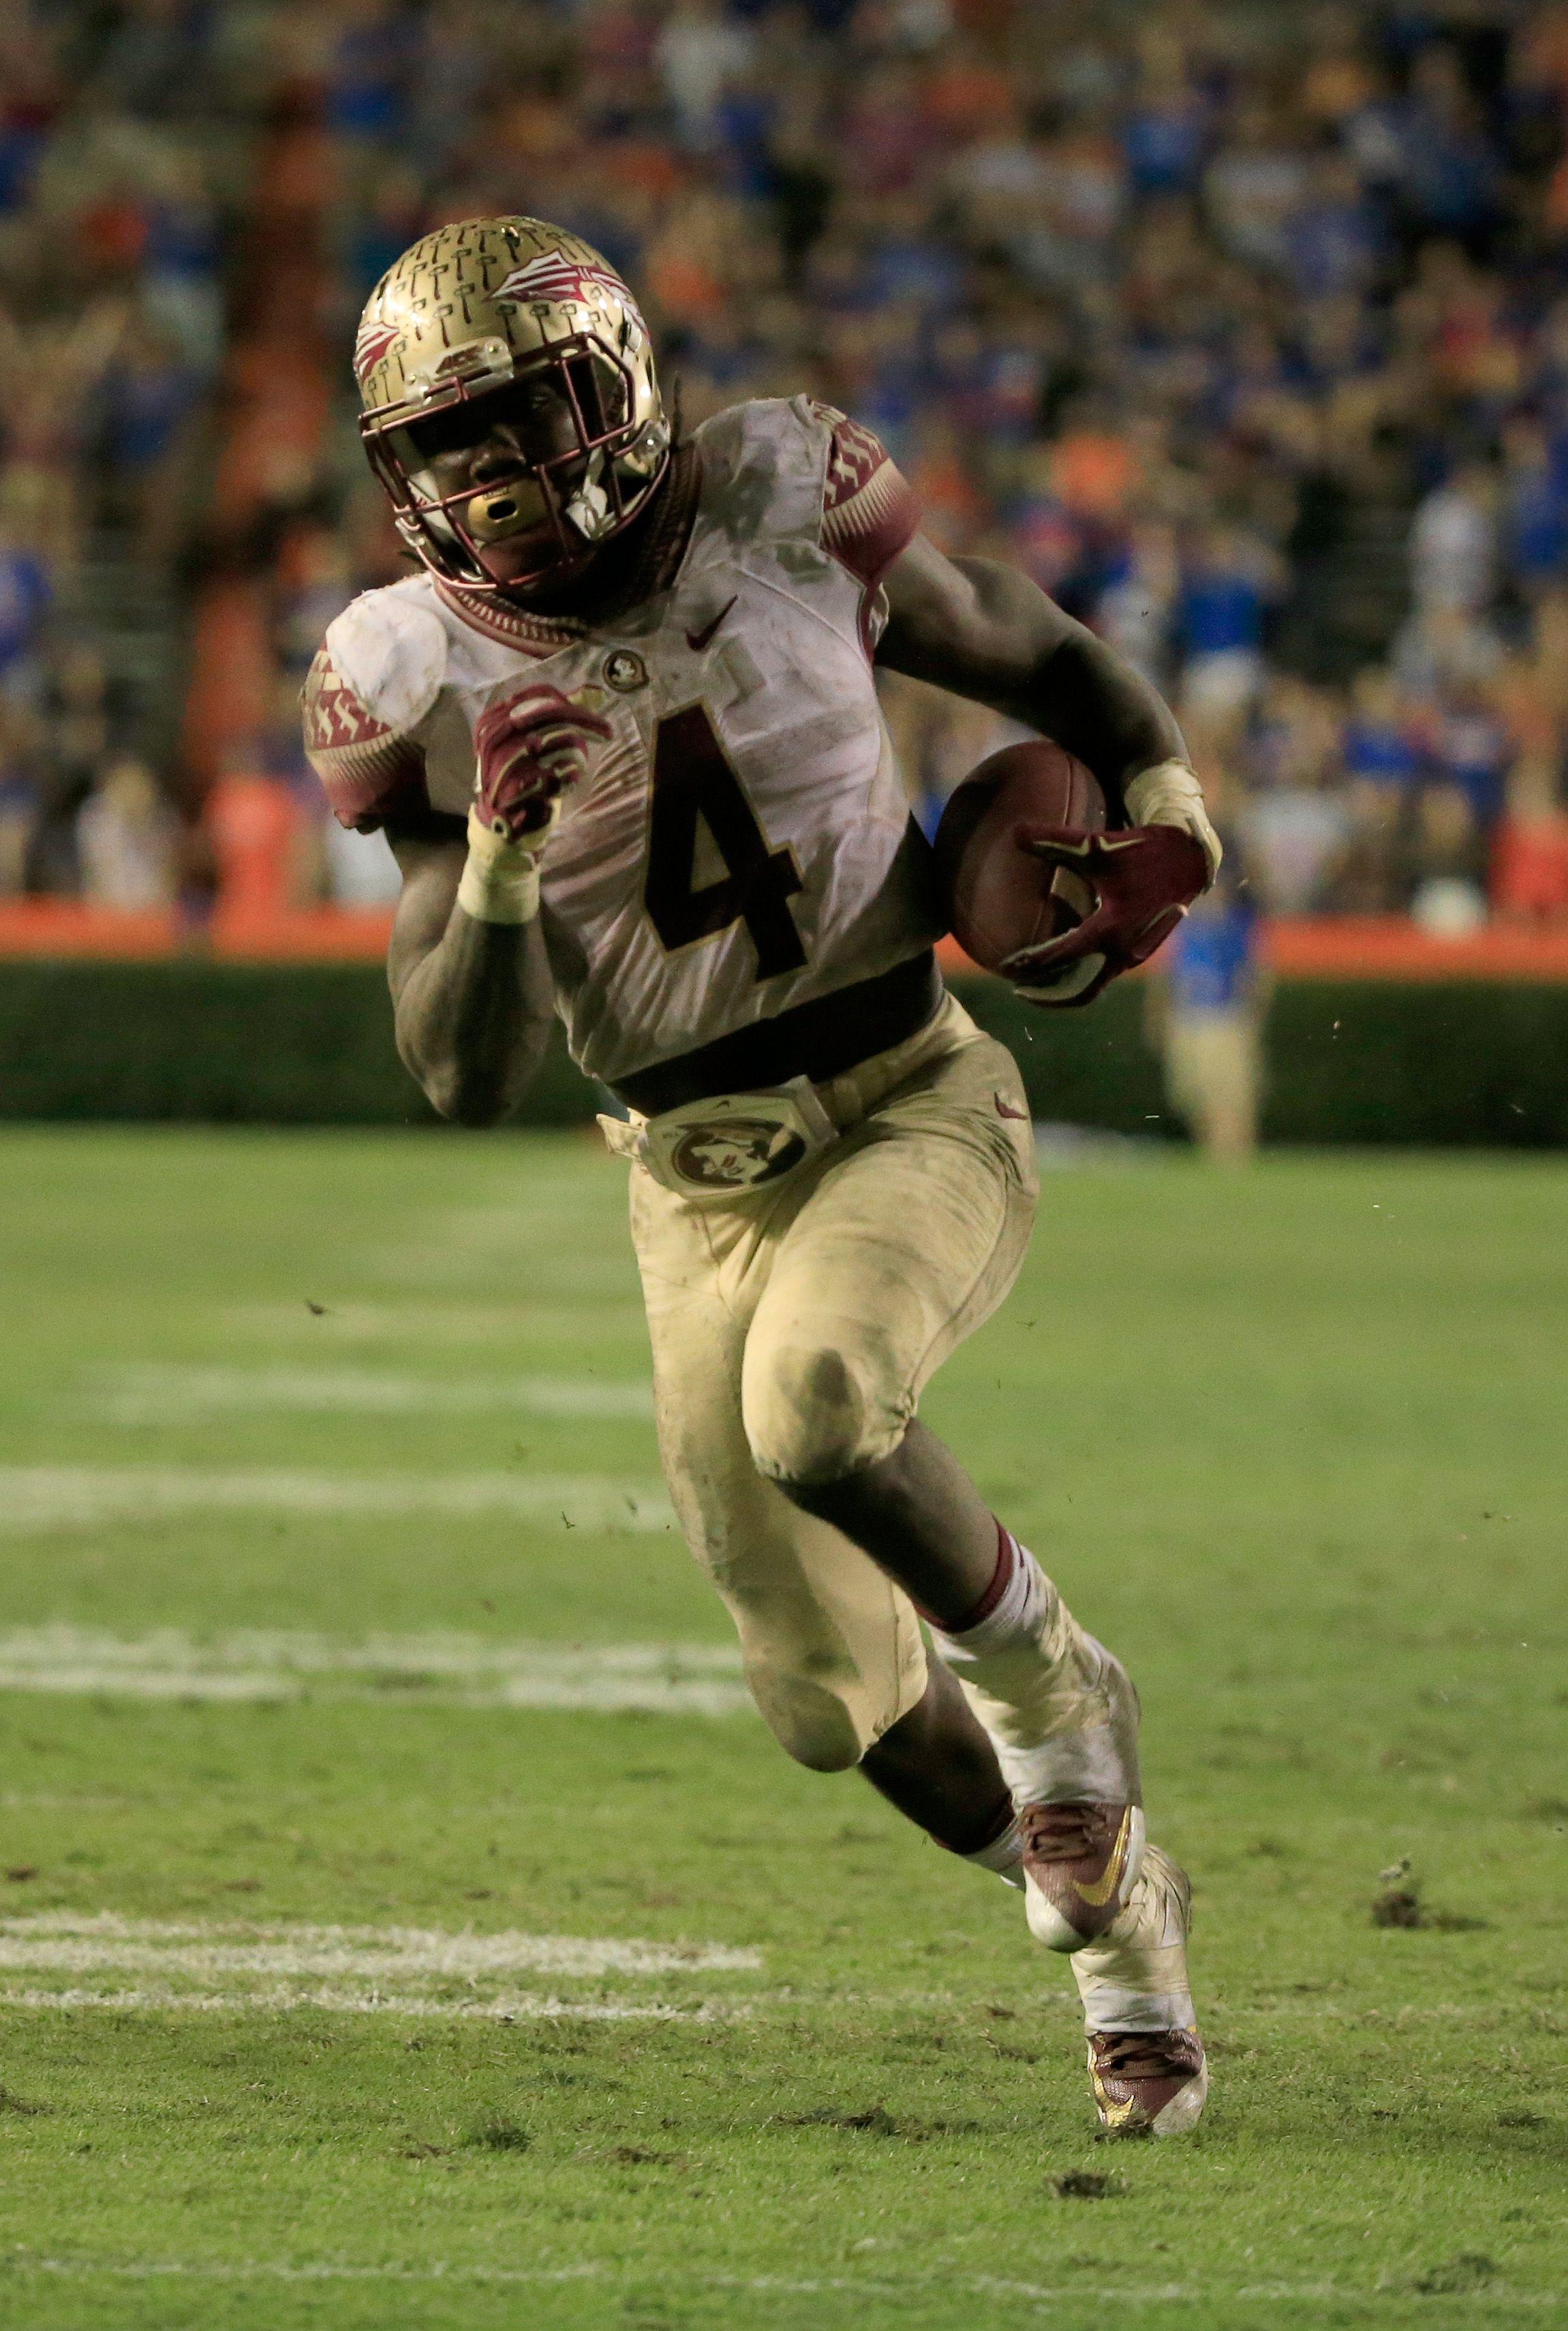 Dalvin Cook: When character concerns aren't concerning